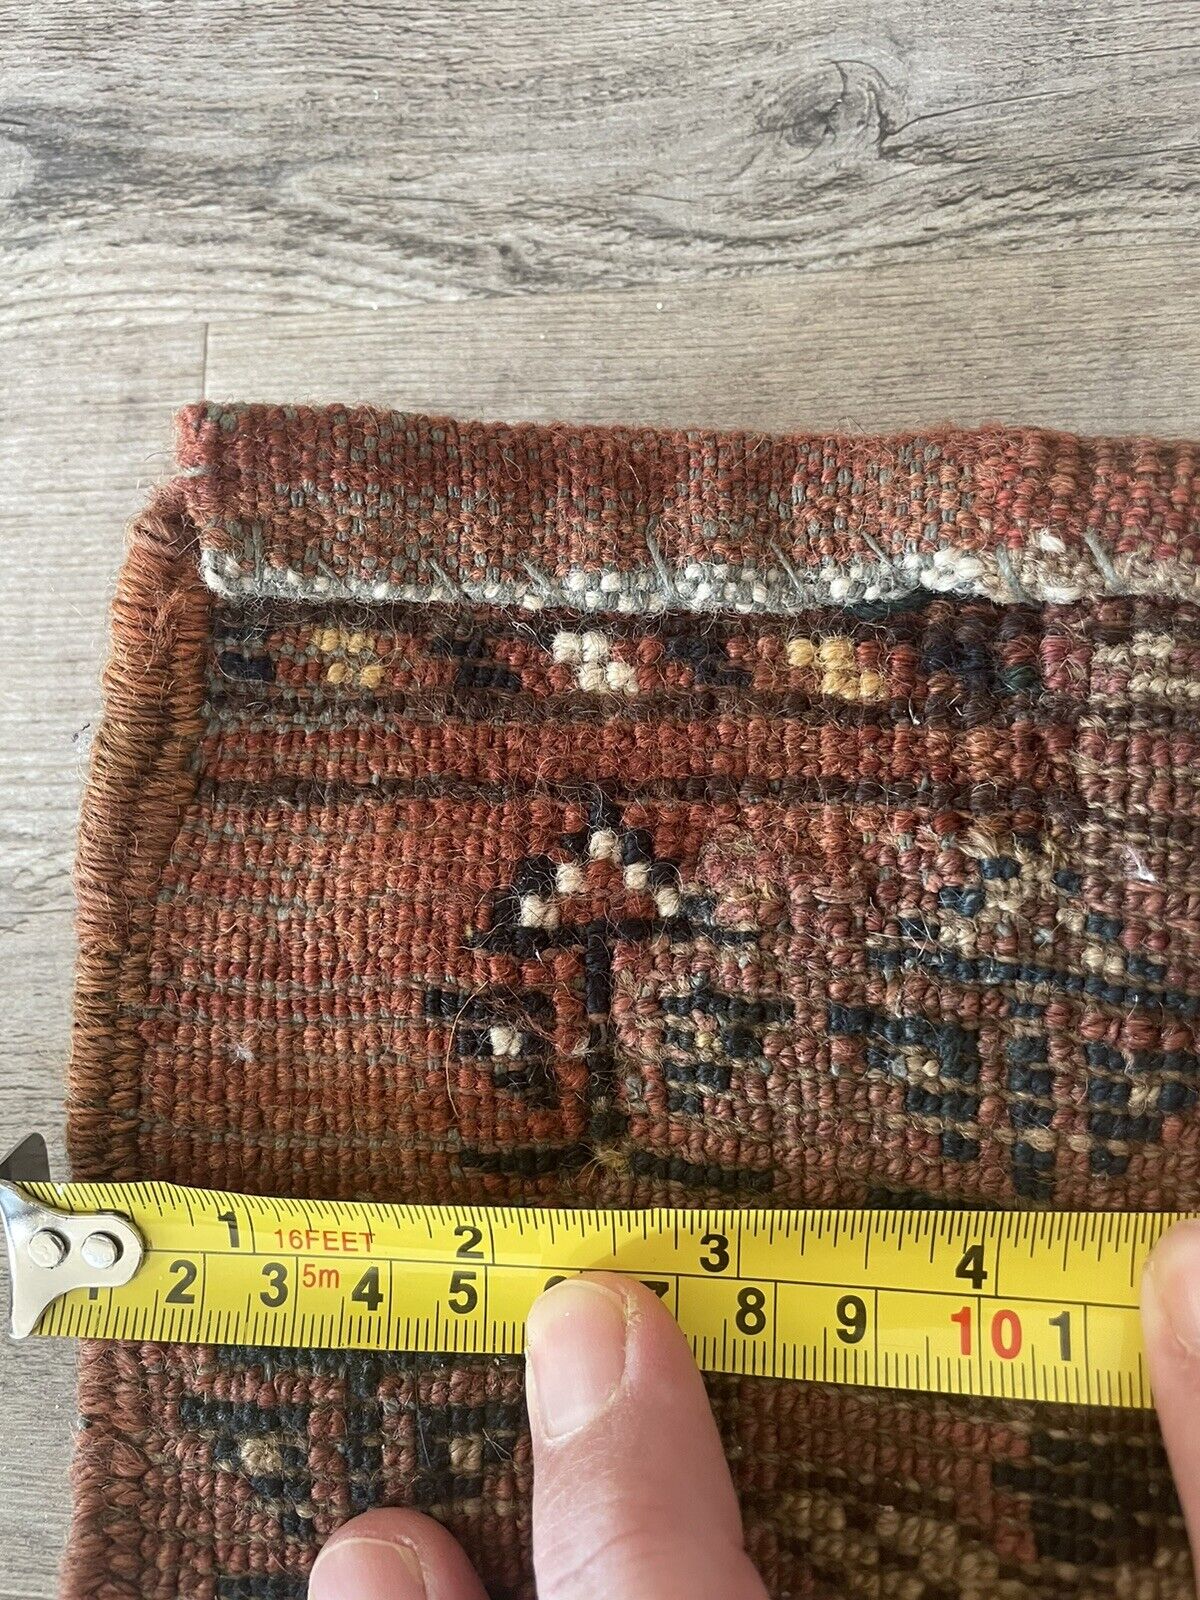 Back side of the Handmade Antique Afghan Beshir Collectible Chuval Rug - Underside view revealing the rug's construction and material.